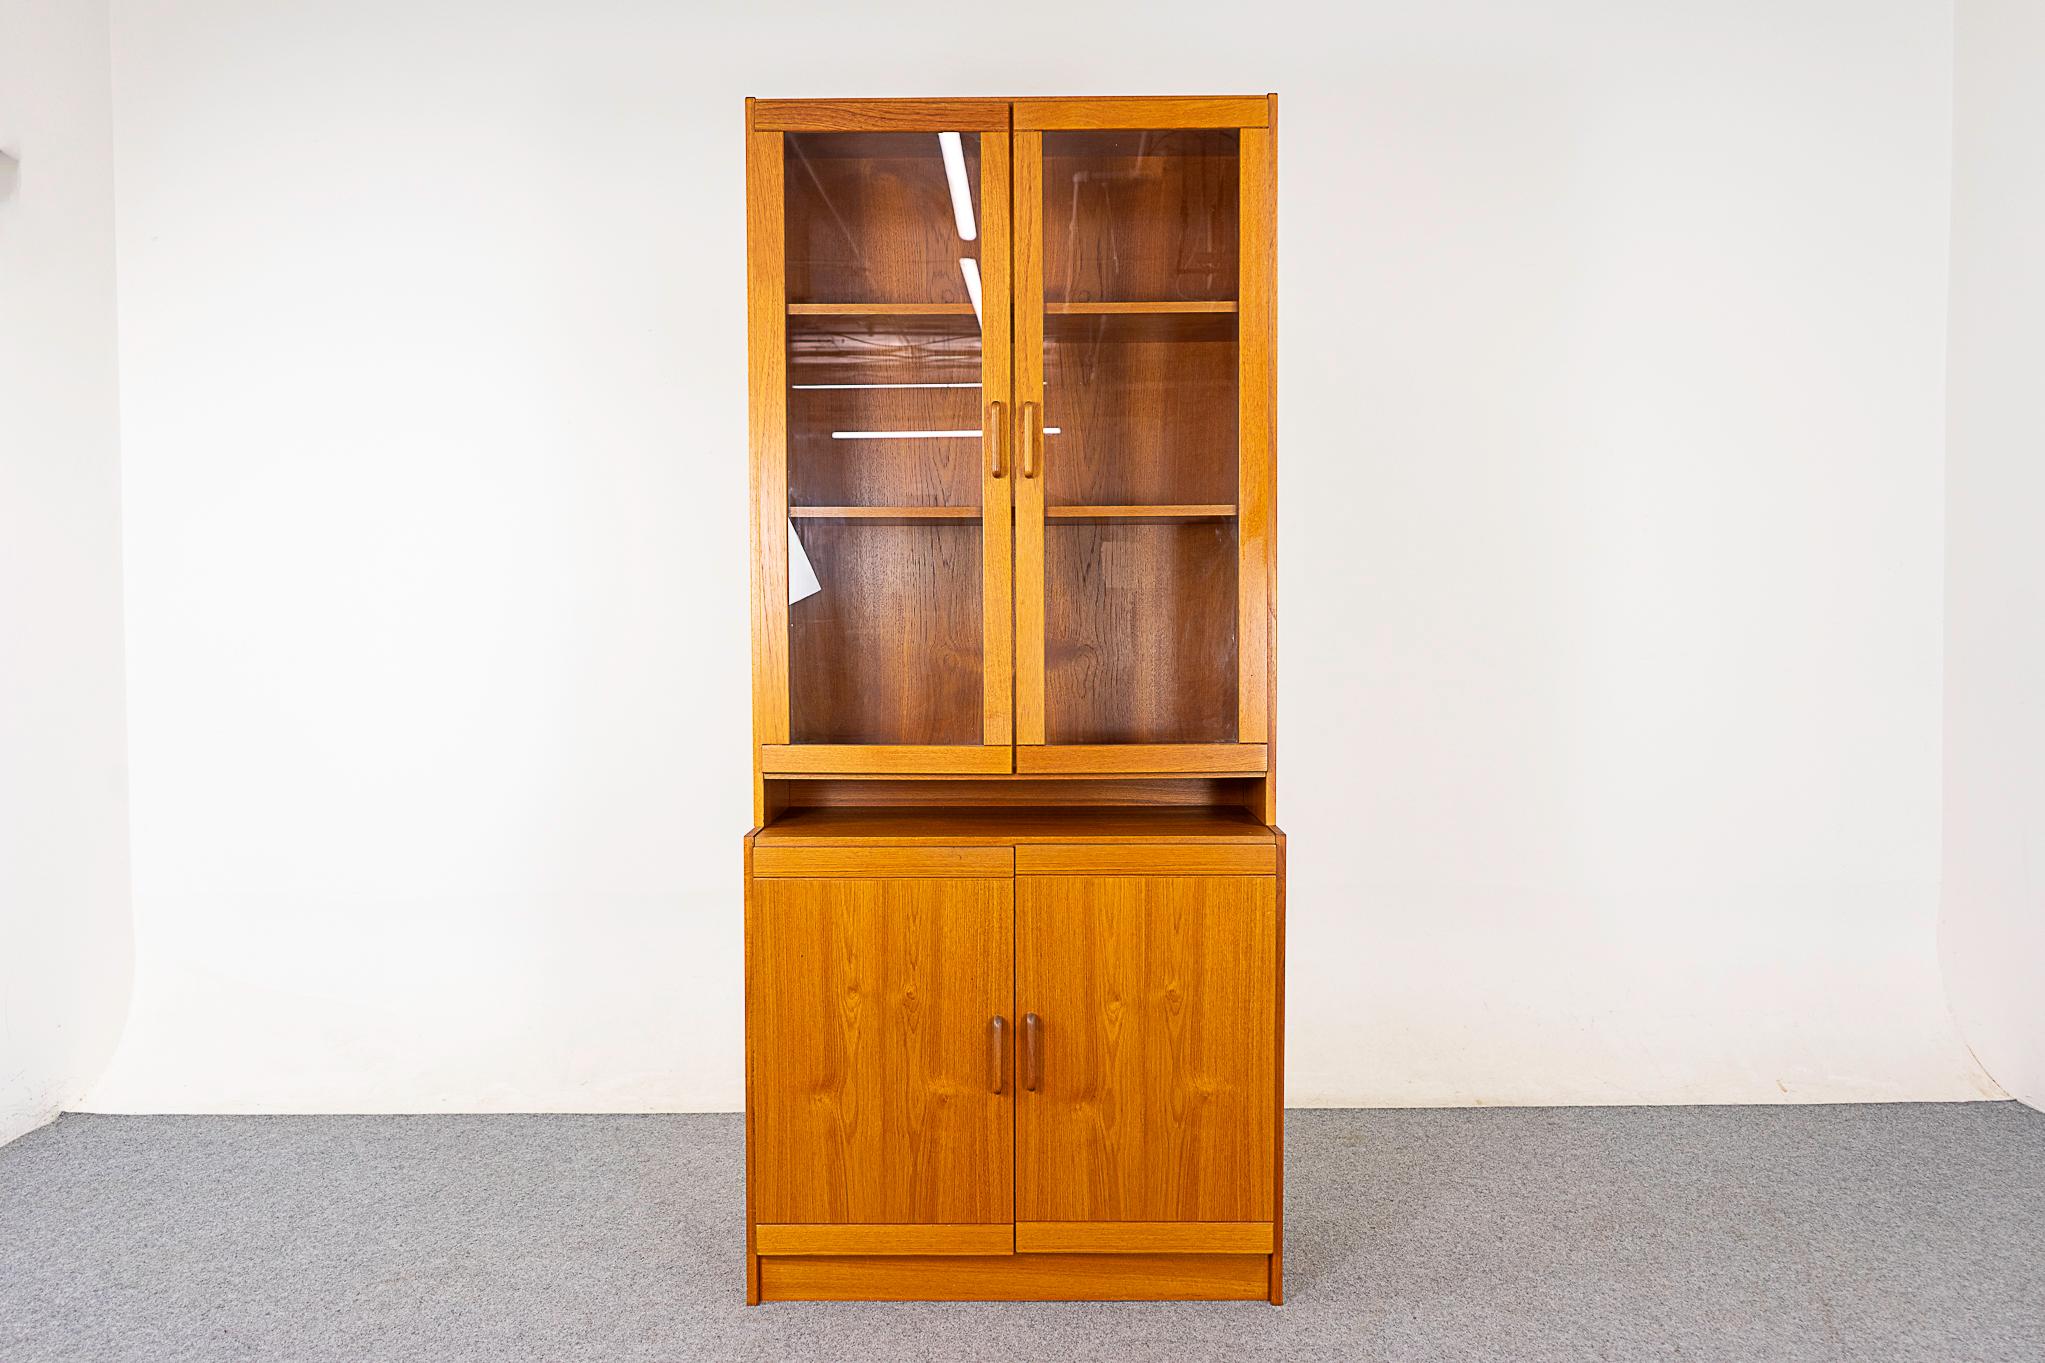 Teak Danish cabinet, circa 1970's. Practical storage solution, lower cabinet with adjustable shelf and glass hutch with 2 adjustable shelves. Display your treasures, dust free! 

Sold as is, nice condition, very minor wear & tear. 